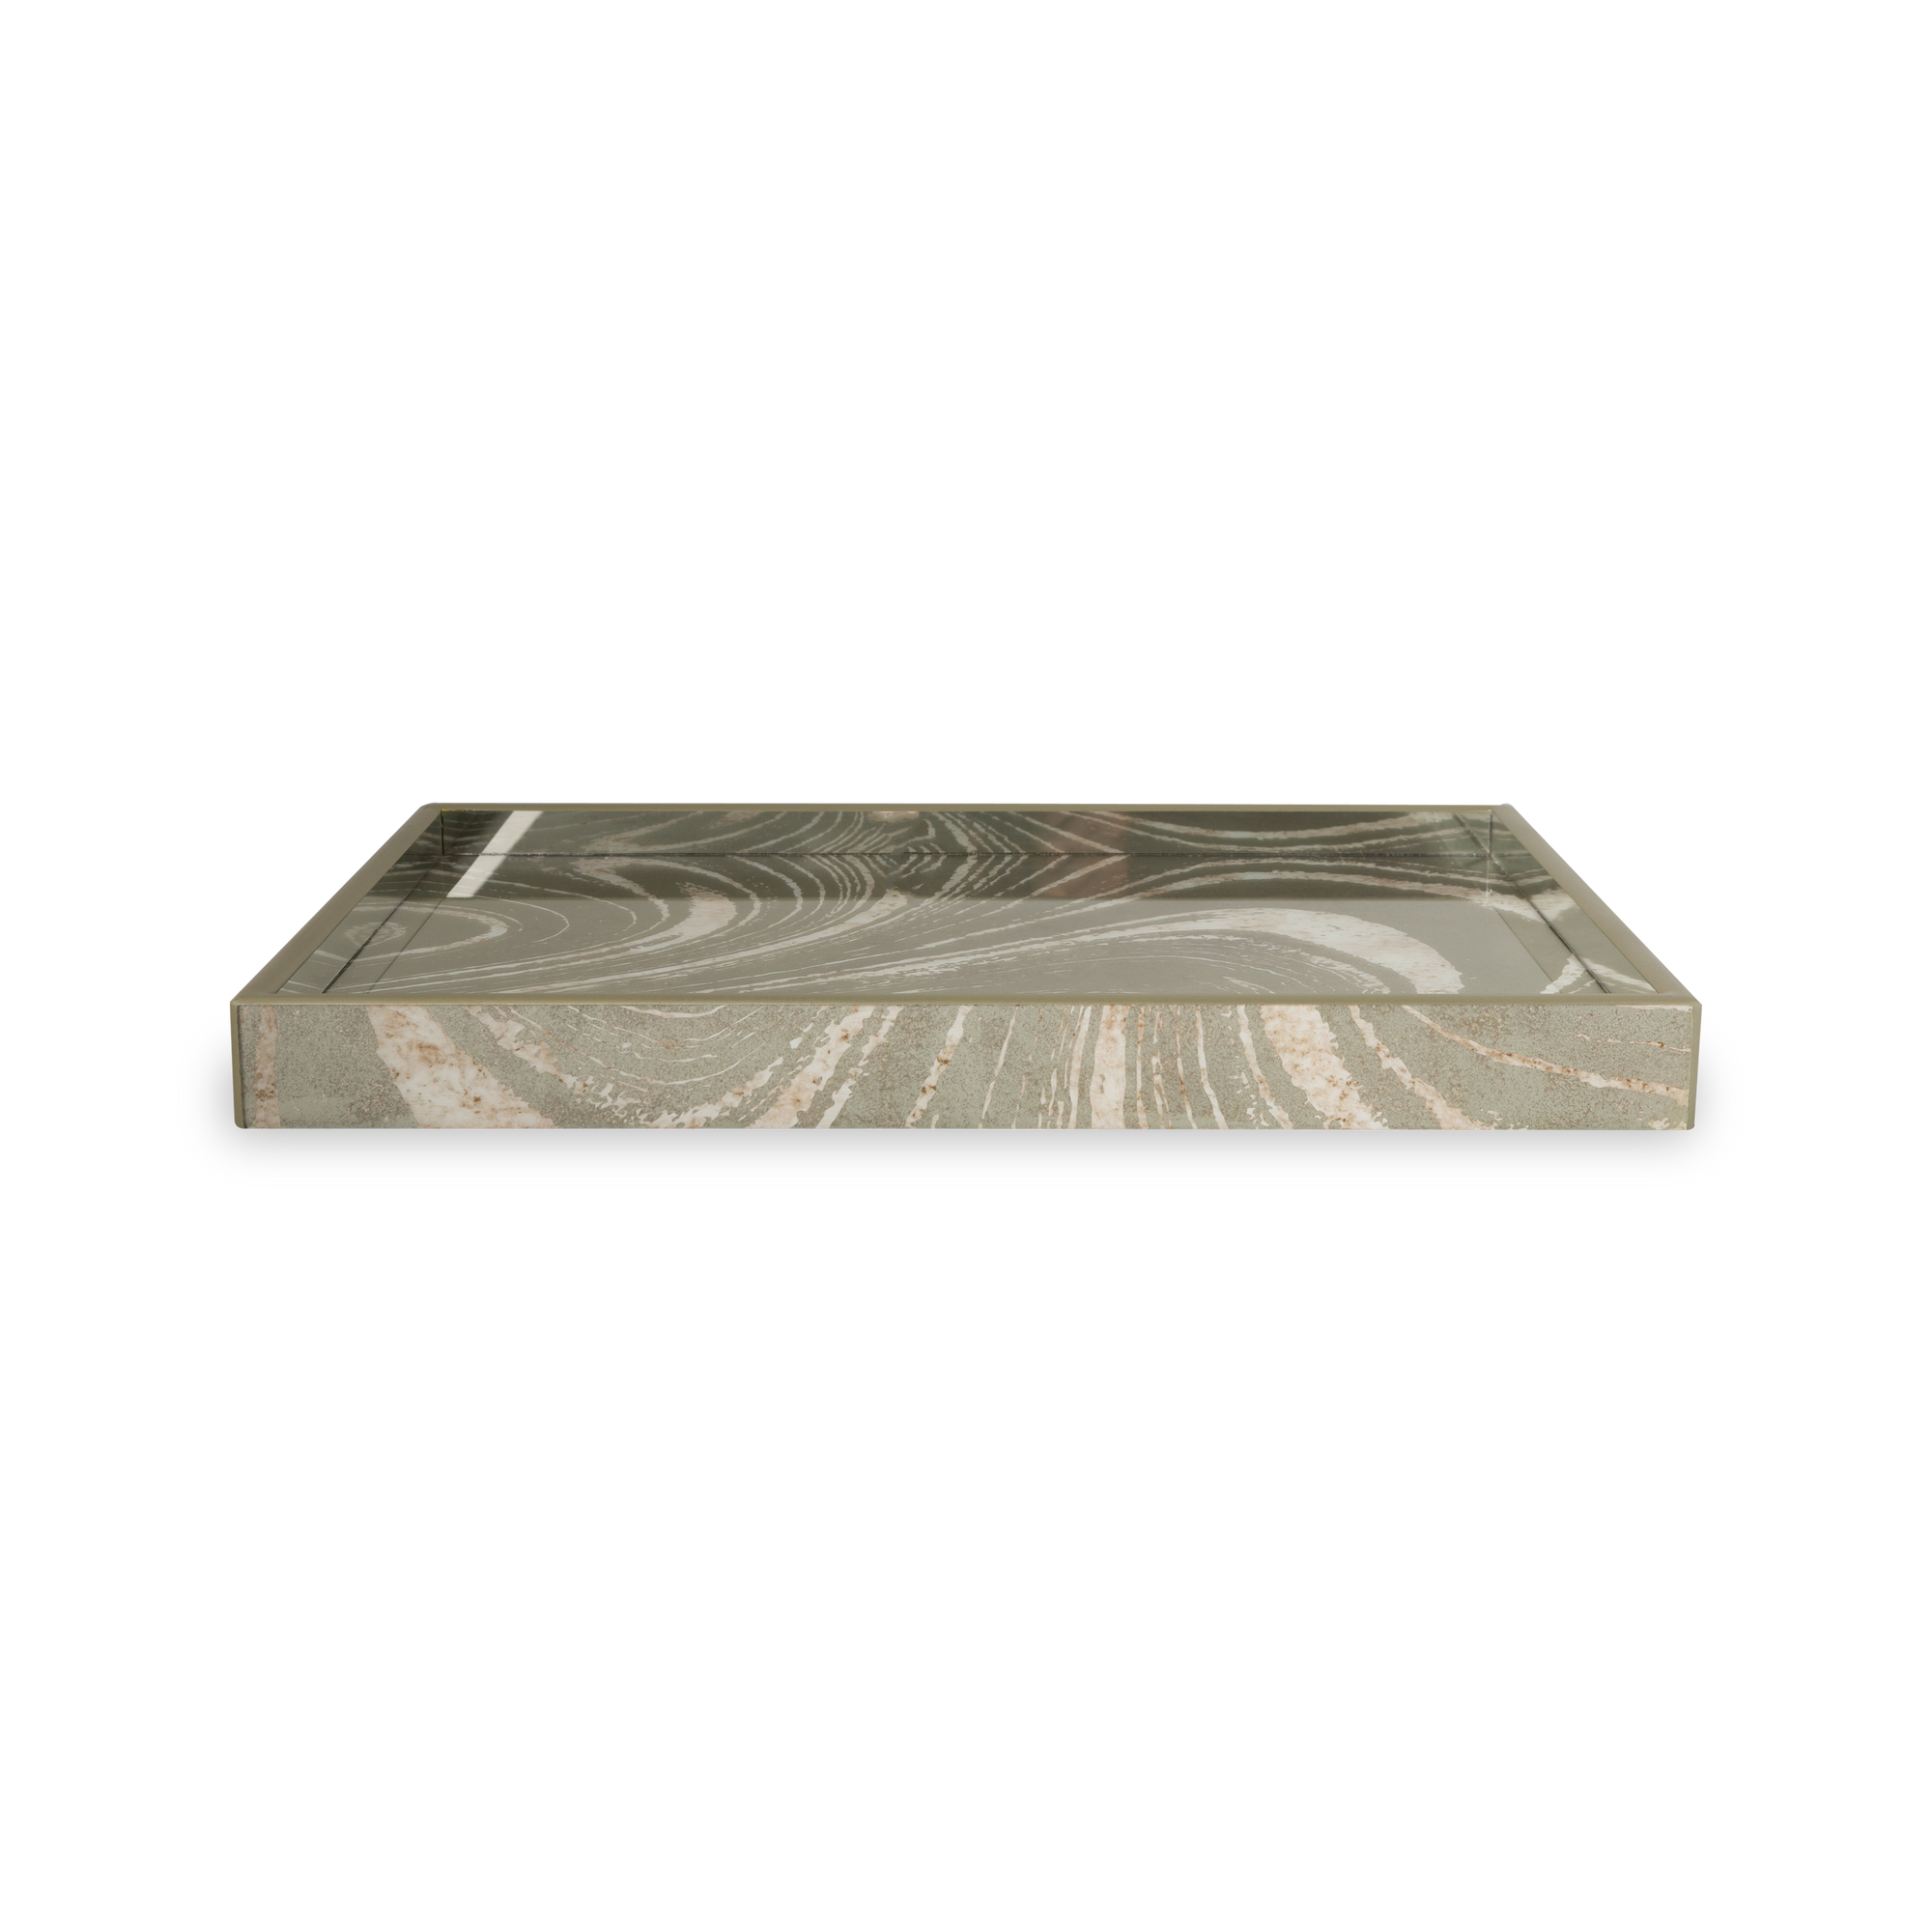 The Mirror Damask Glass Tray features a unique fluid swirl of beige and gold creating a natural colour contrast in a rectangular shape.